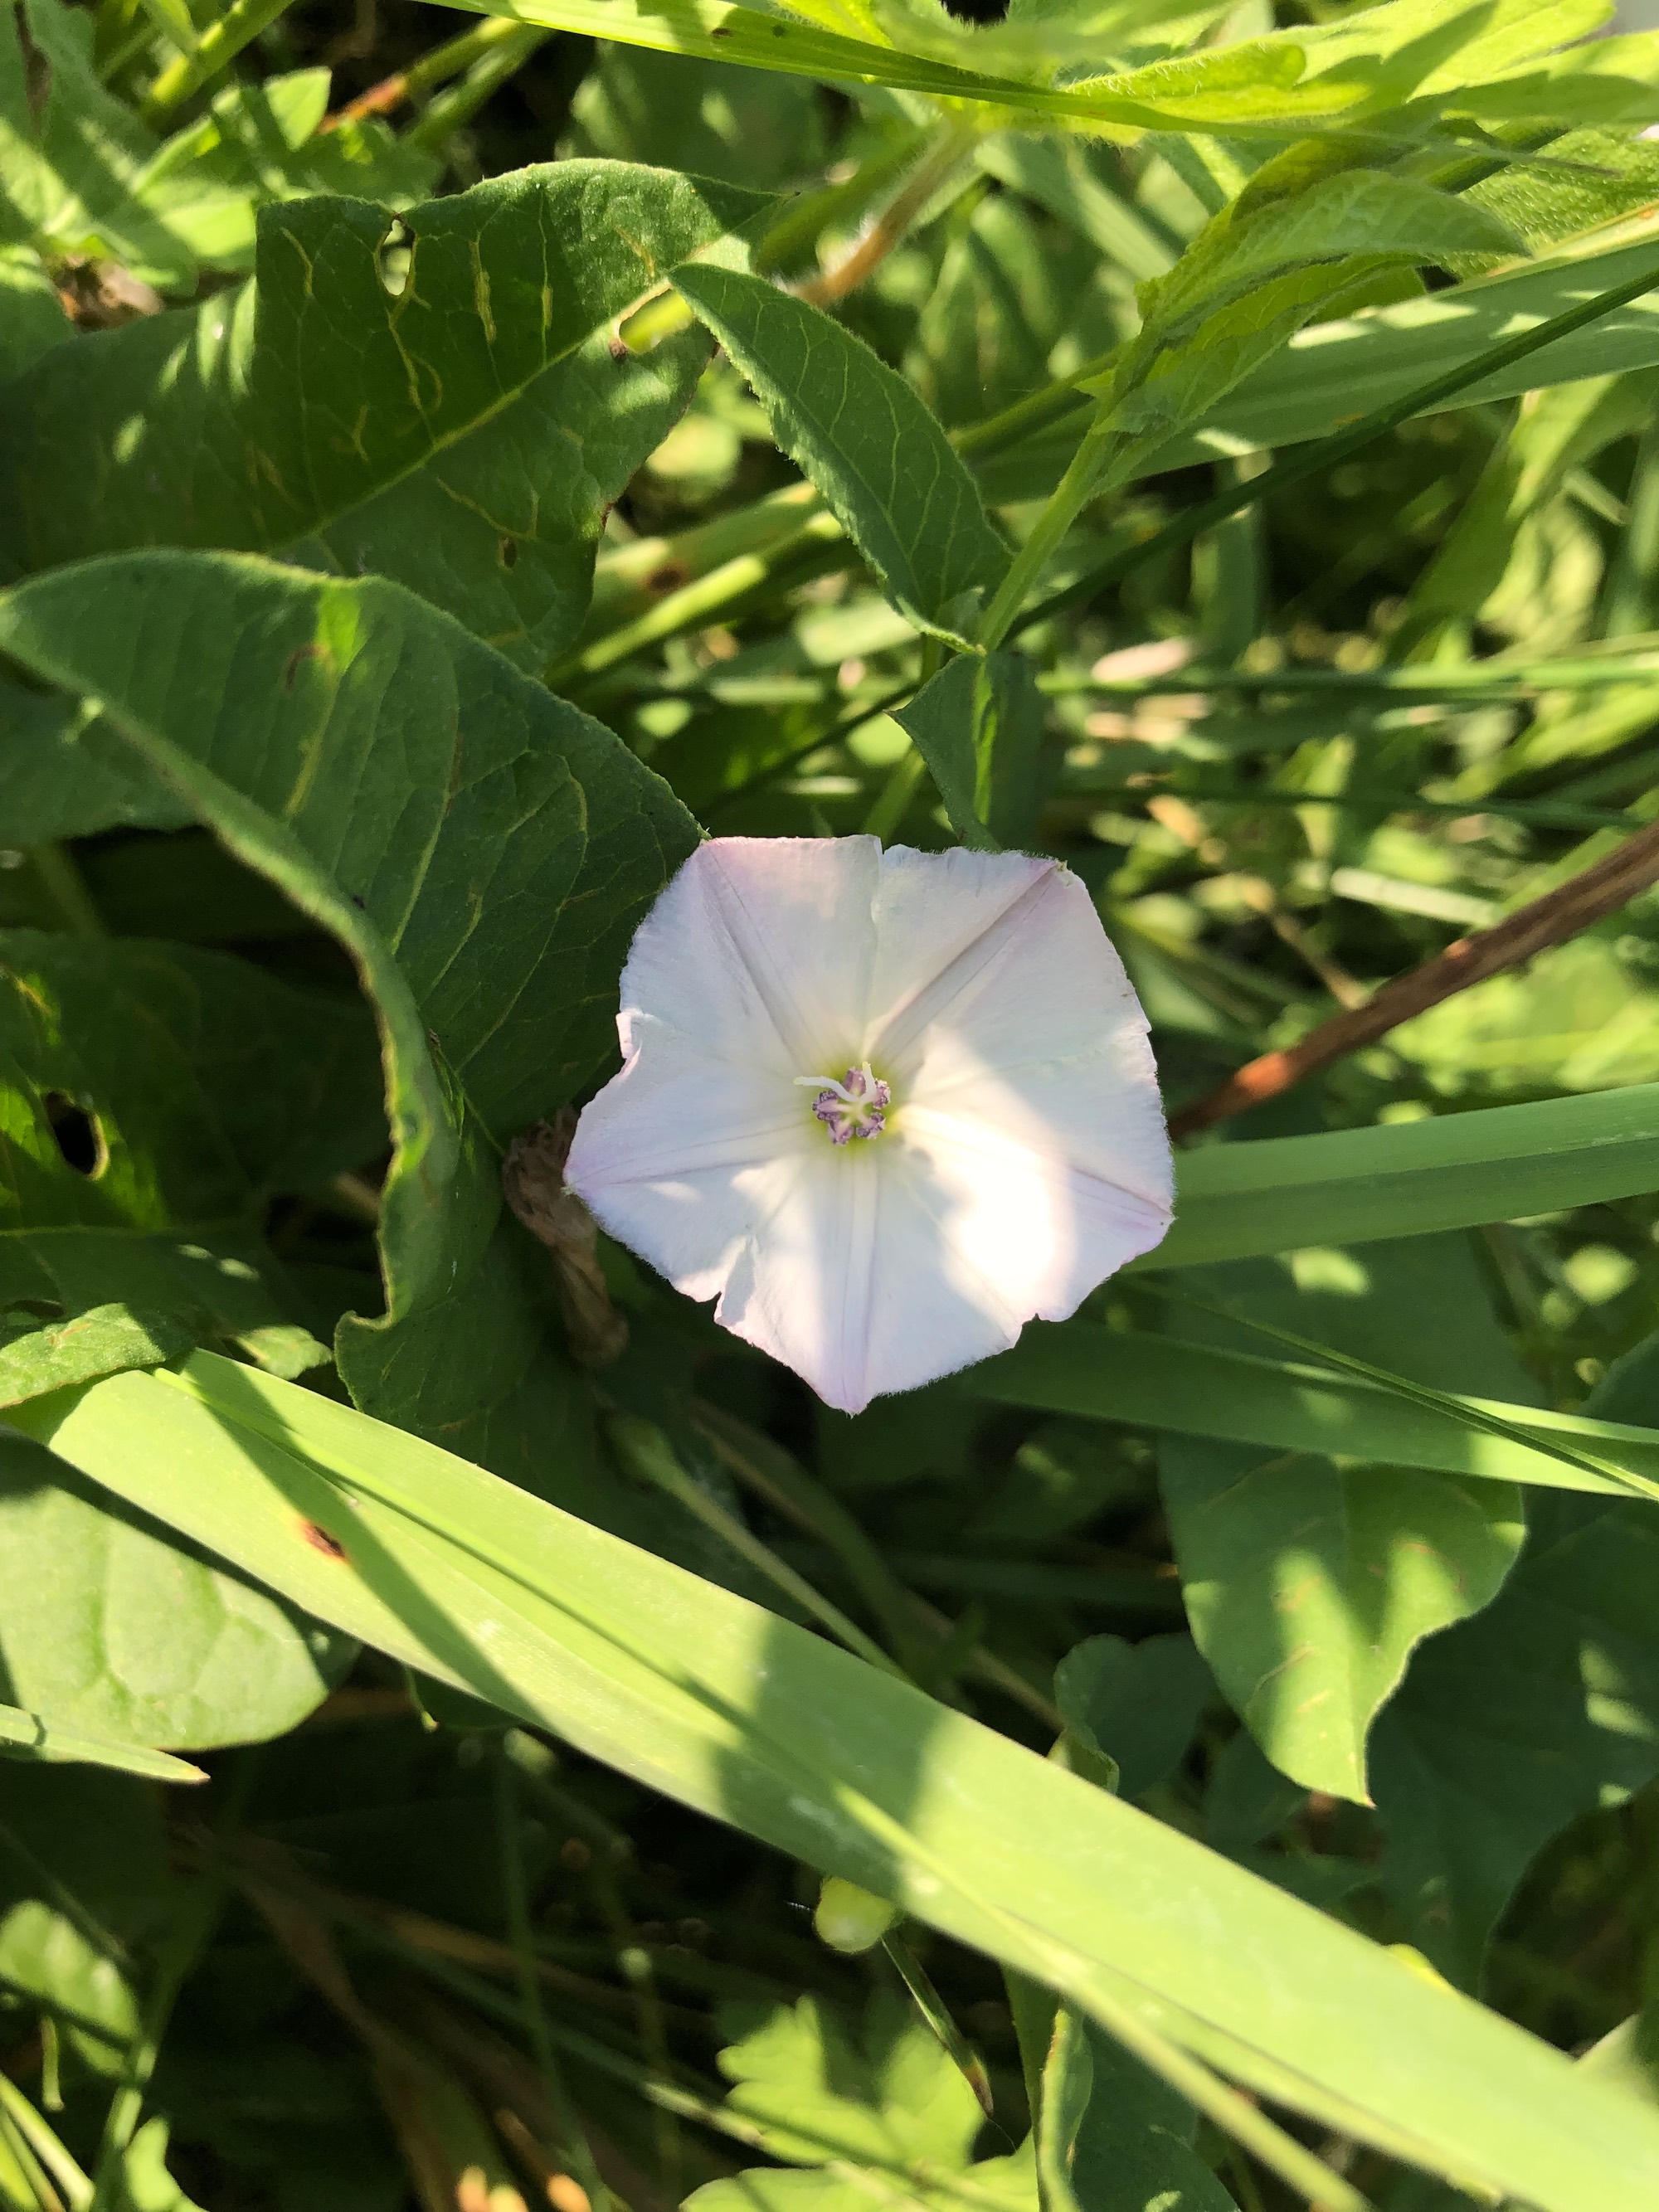 Field Bindweed on shore of Marion Dunn Pond in Madison, Wisconsin on June 11, 2021.